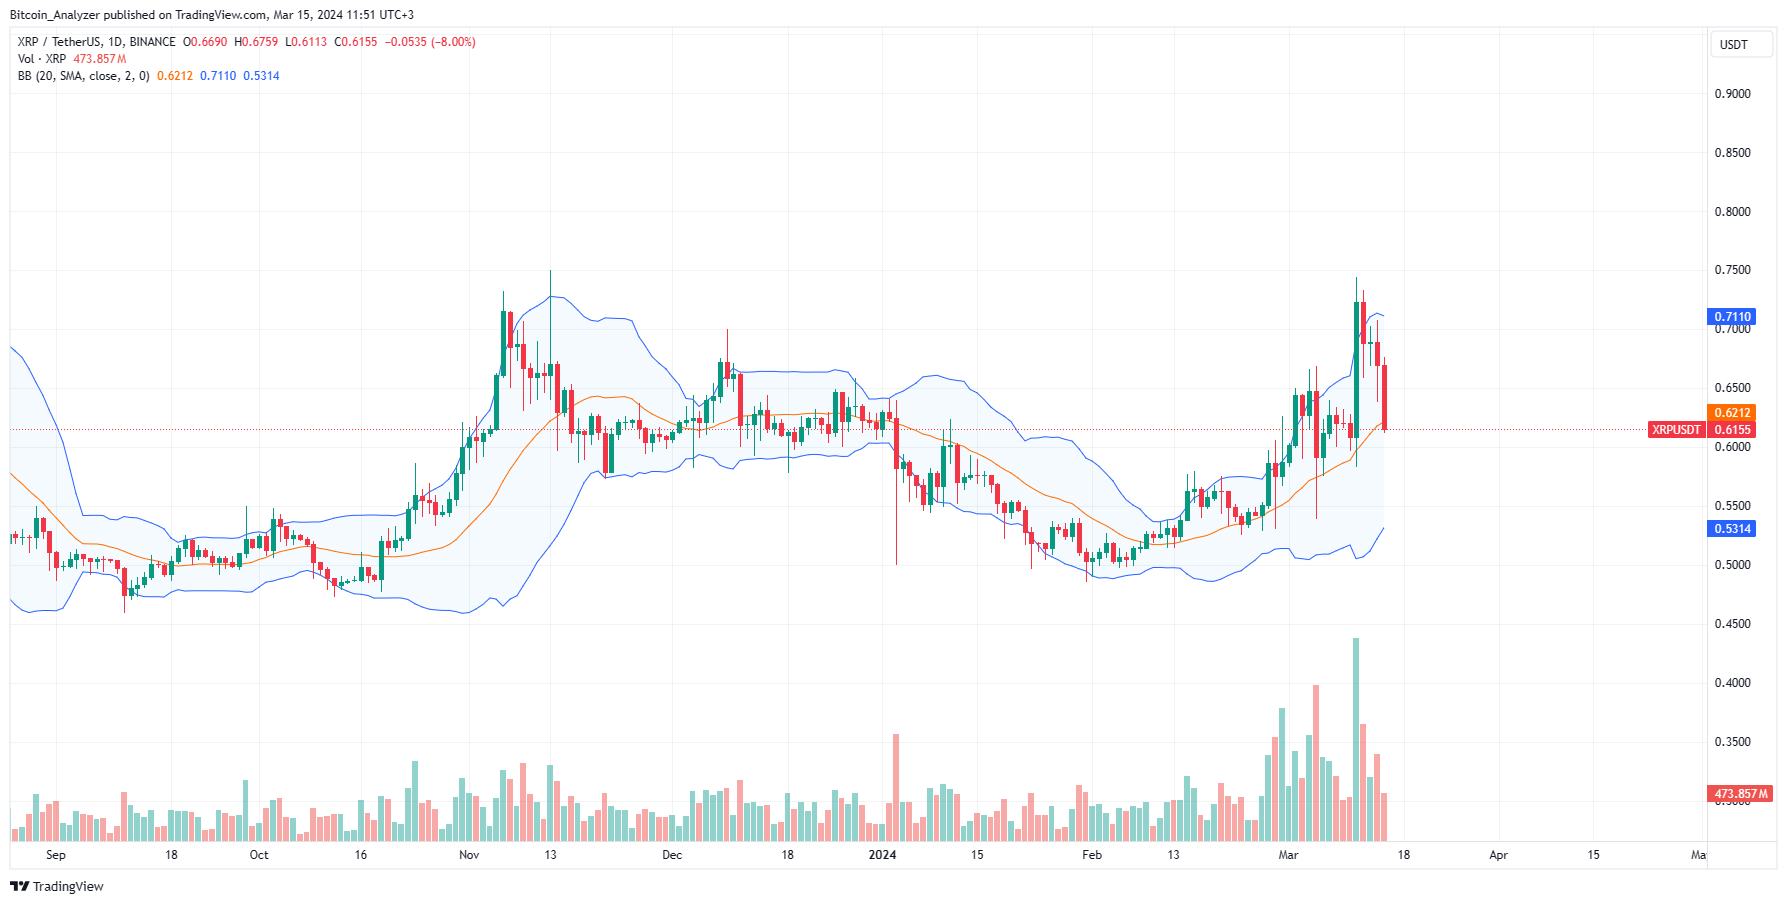 XRP Drops, Will Bulls Rally Above $1 In April?